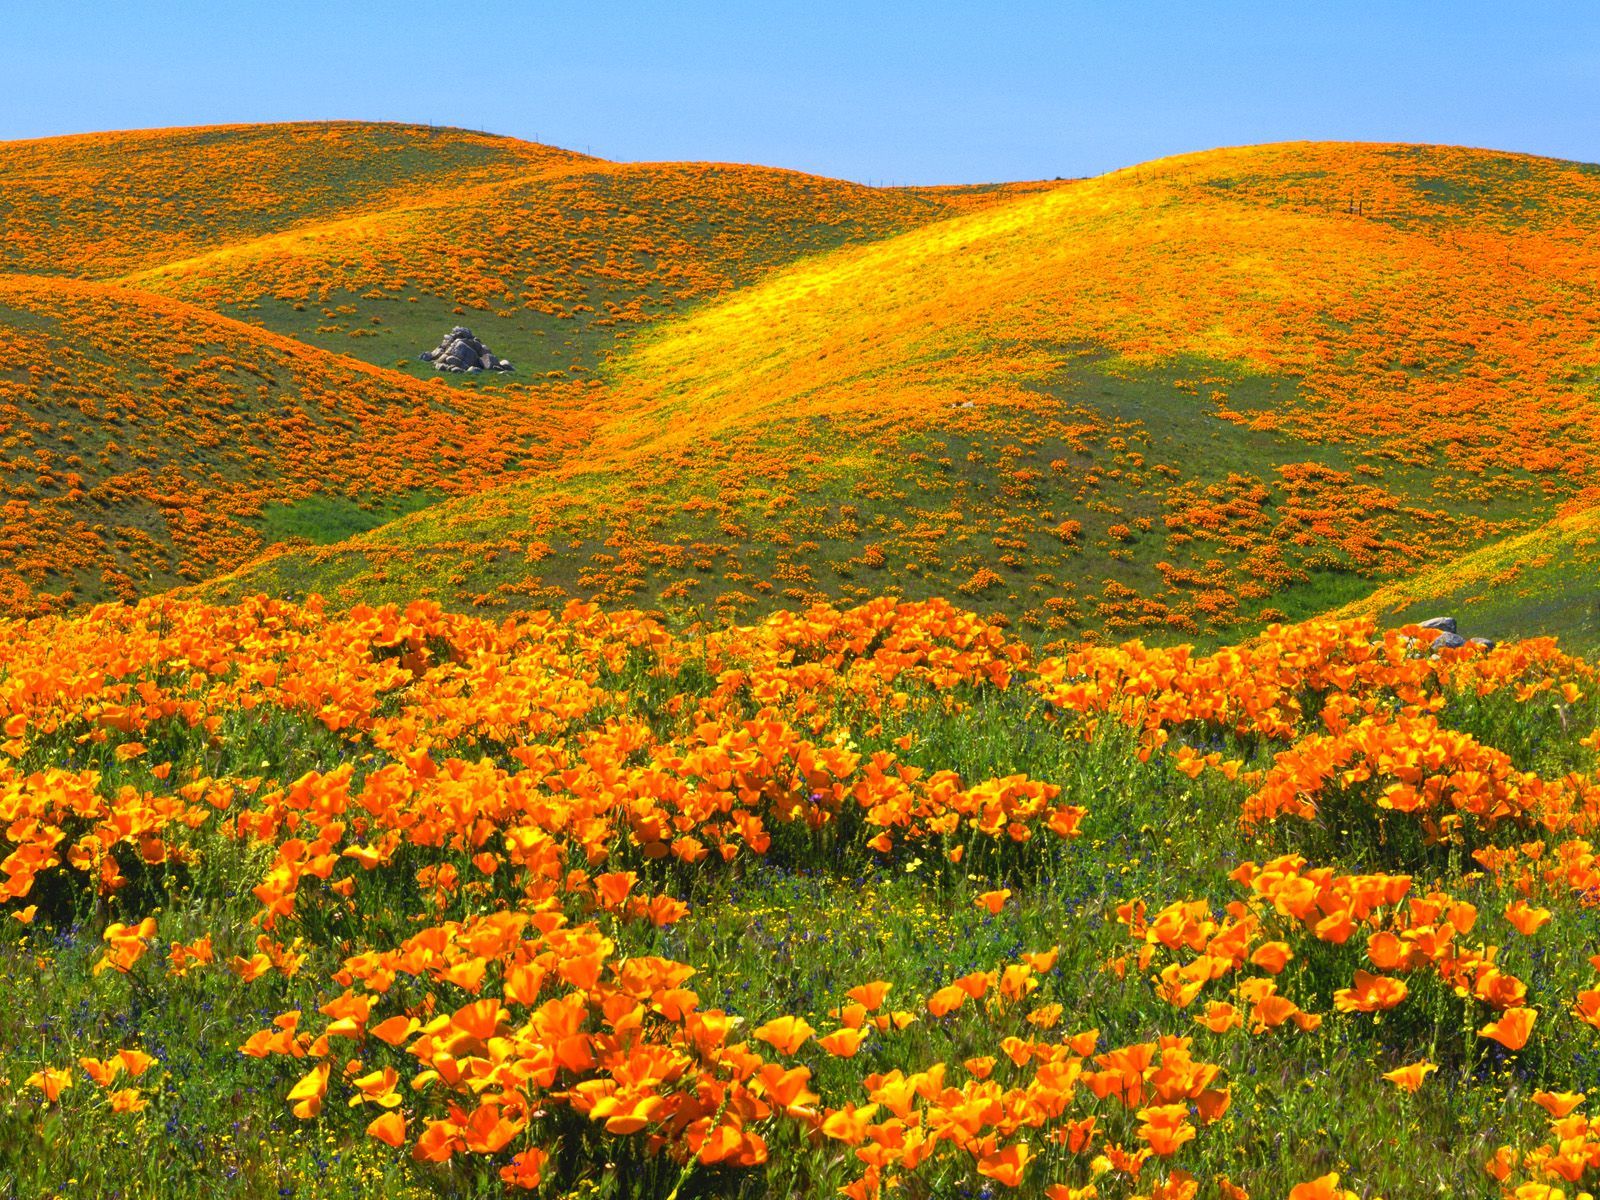 California Poppies and Rolling Hills. California poppy, California wildflowers, Poppies